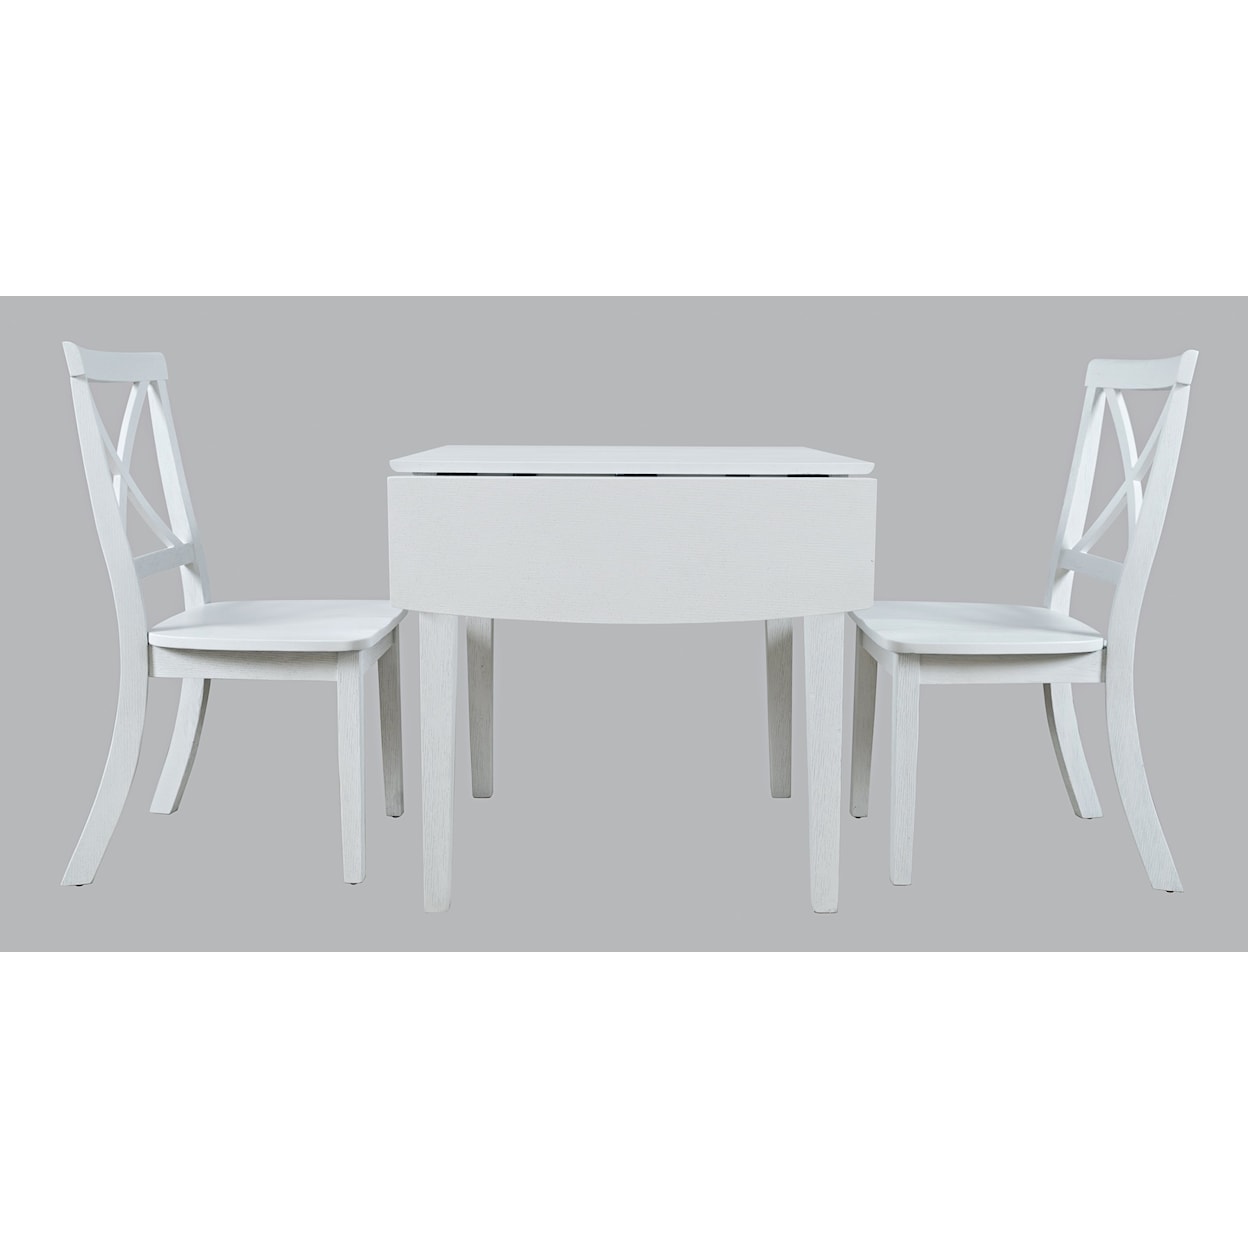 Belfort Essentials Eastern Tides 3 Piece Table and Chair Set